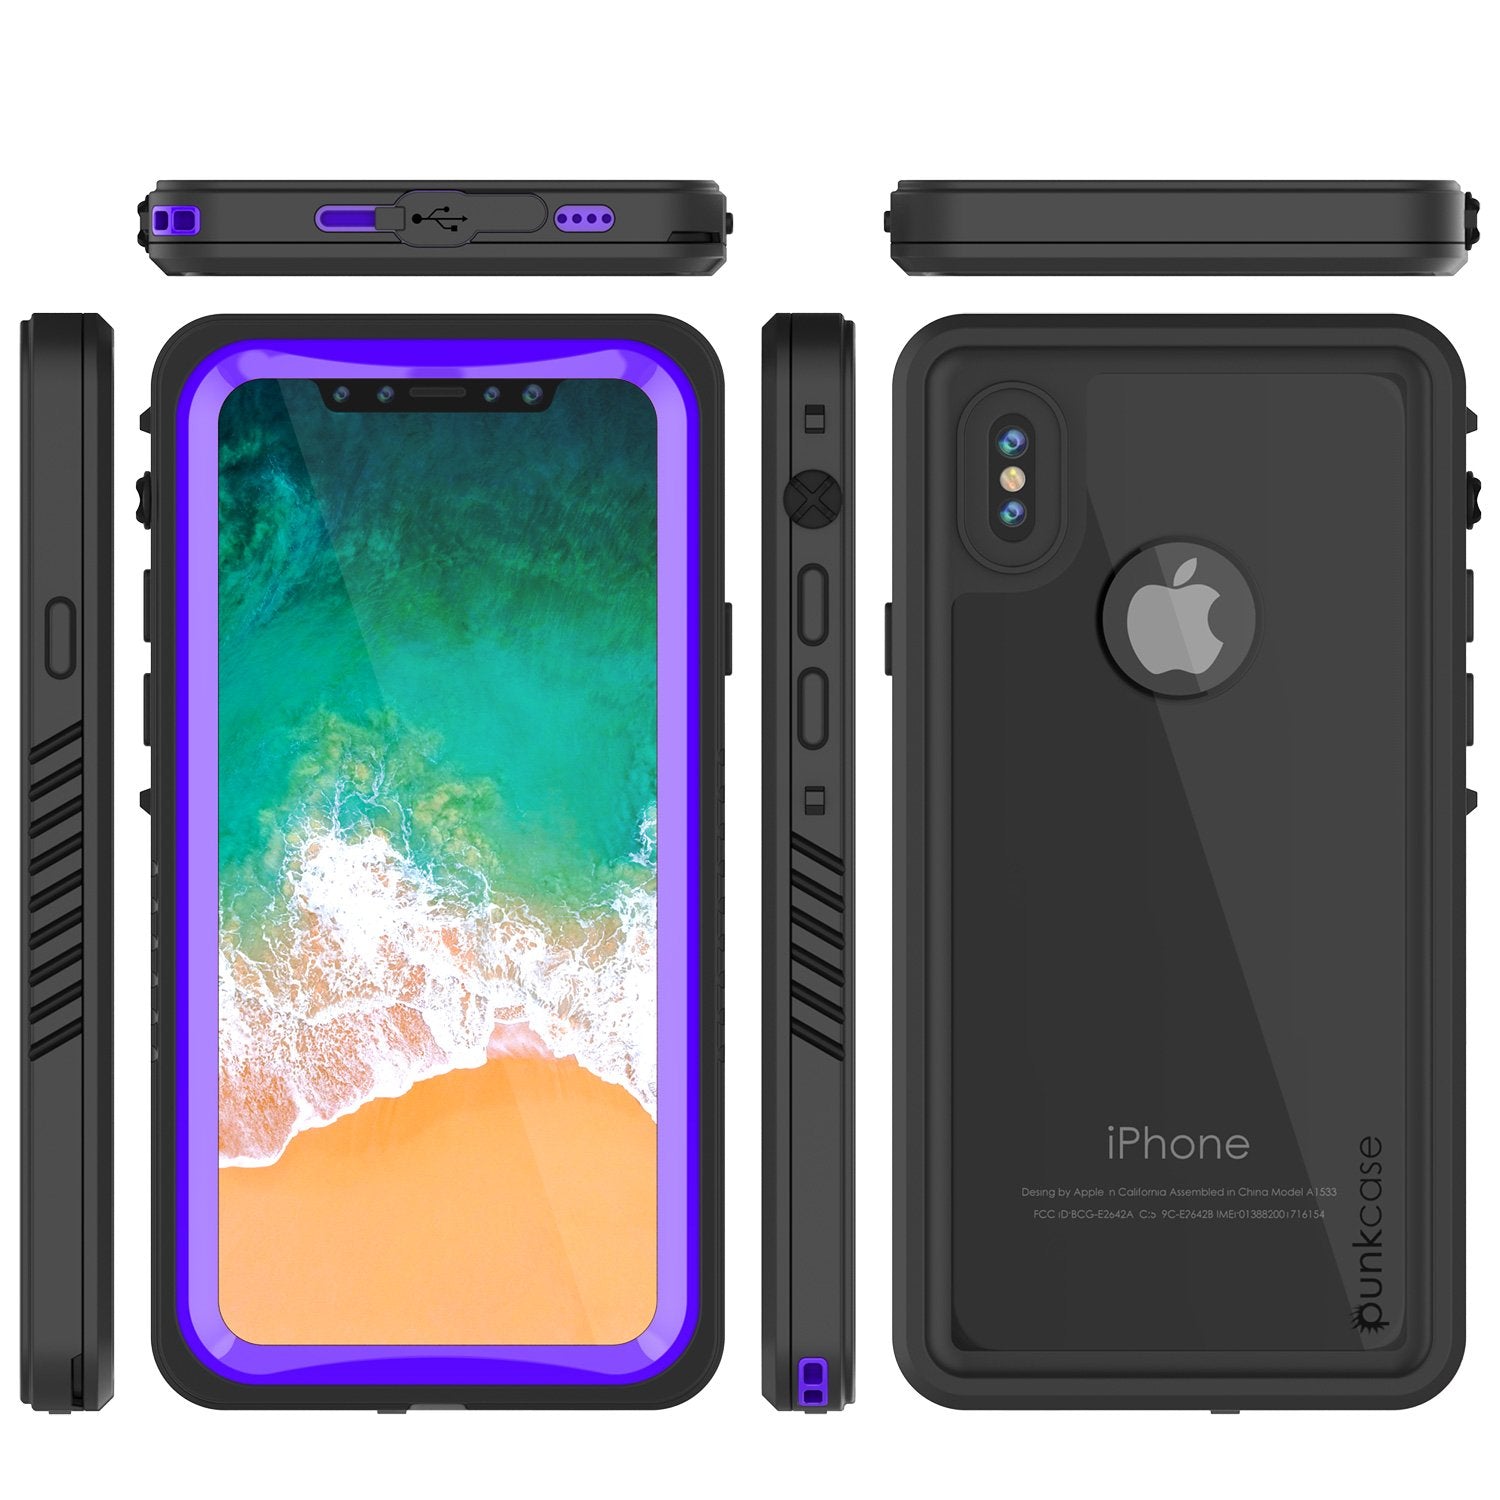 iPhone X Case, Punkcase [Extreme Series] [Slim Fit] [IP68 Certified] [Shockproof] [Snowproof] [Dirproof] Armor Cover W/ Built In Screen Protector for Apple iPhone 10 [PURPLE]